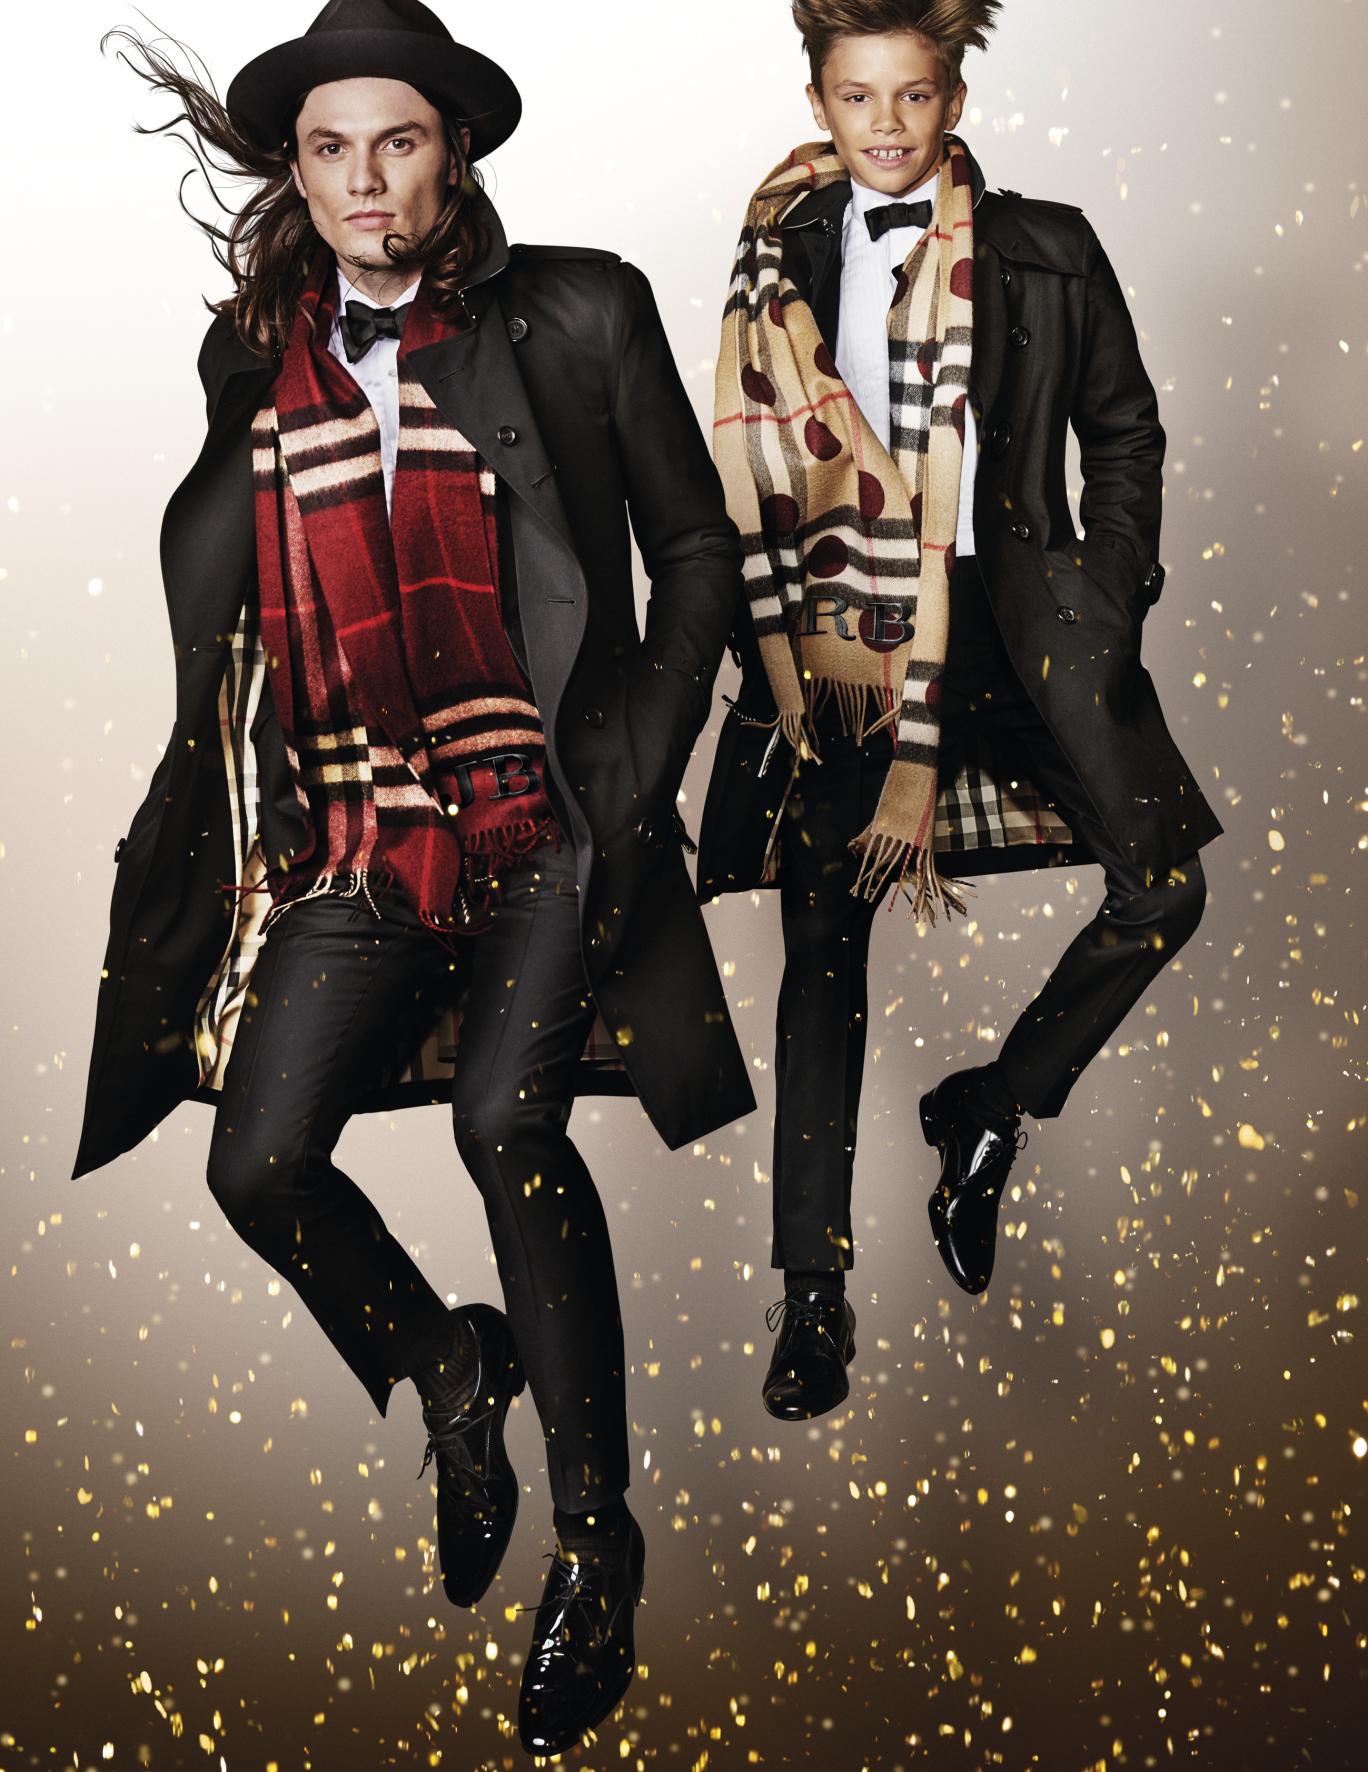 james_bay_and_romeo_beckham_in_the_burberry_festive_campaign_shot_by_mario_testino_0.jpg